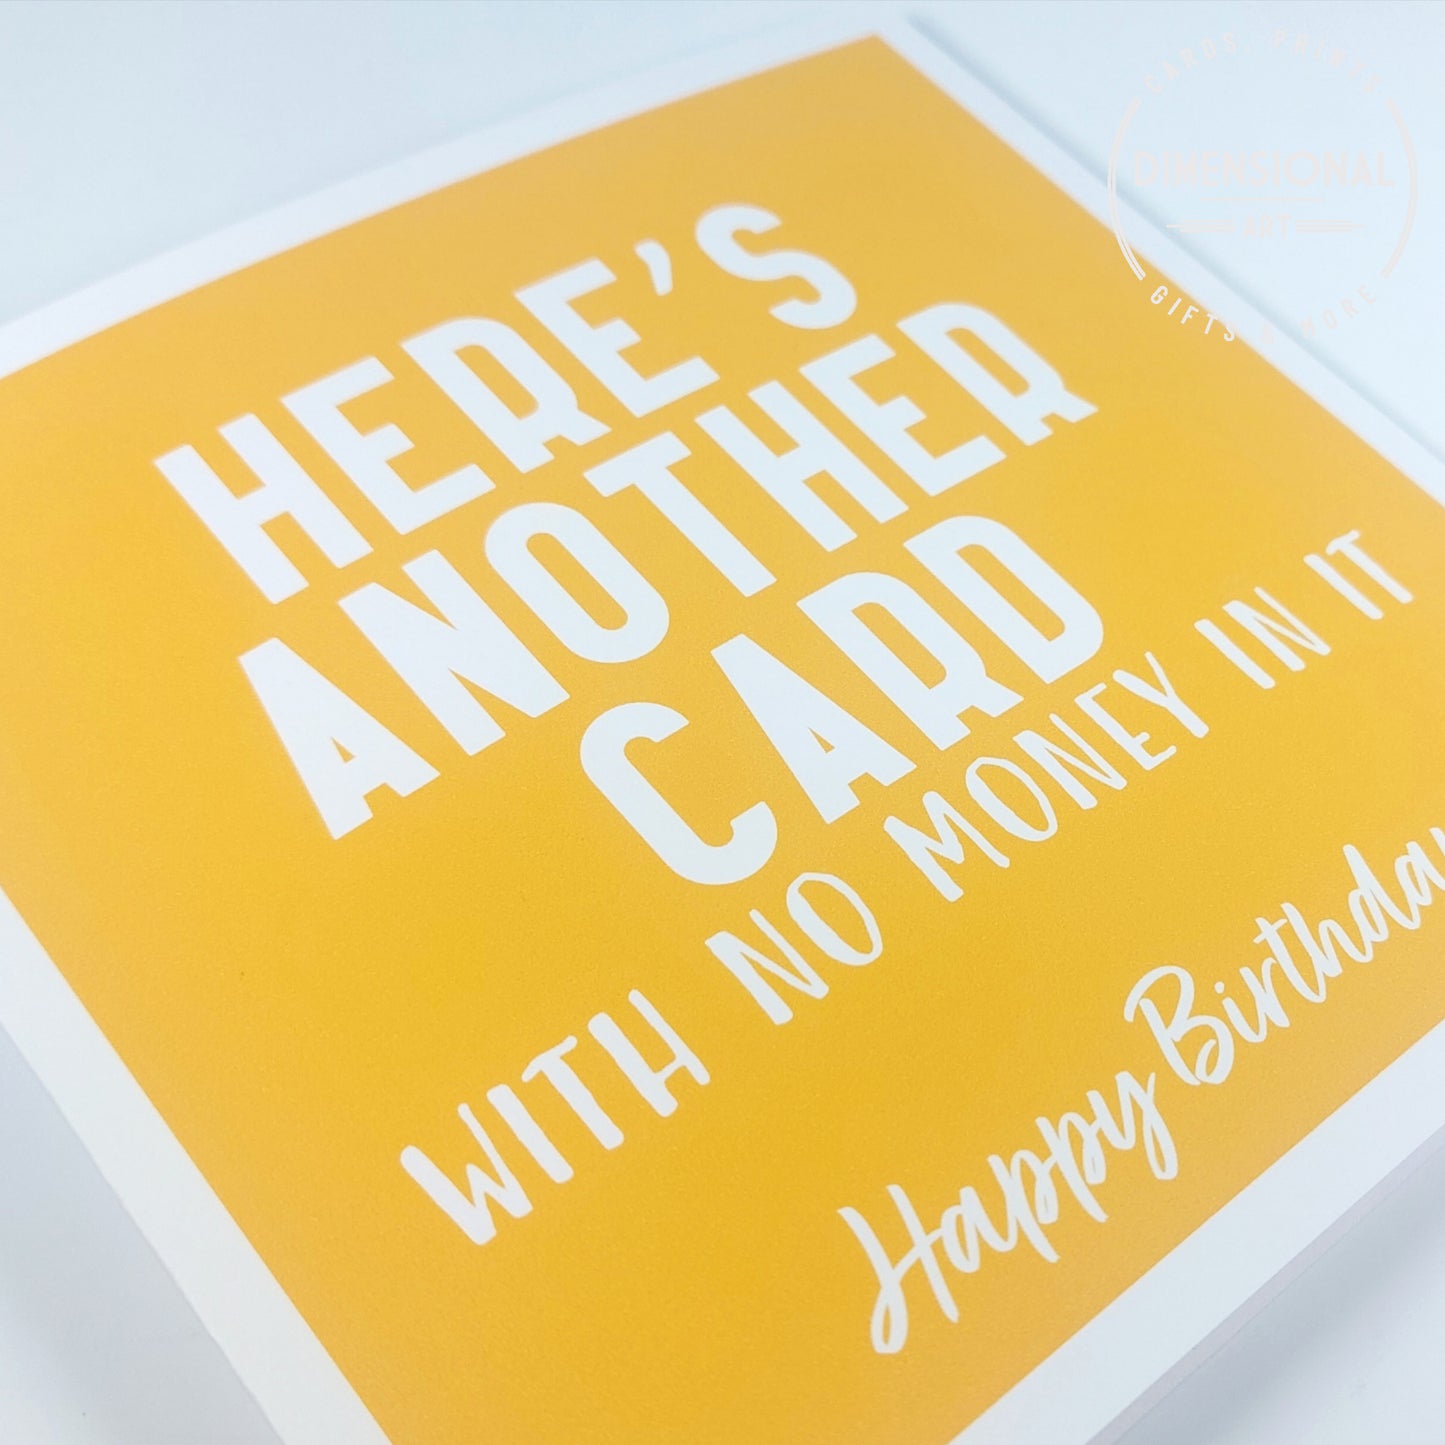 Here's another card with no money in it - Birthday Card